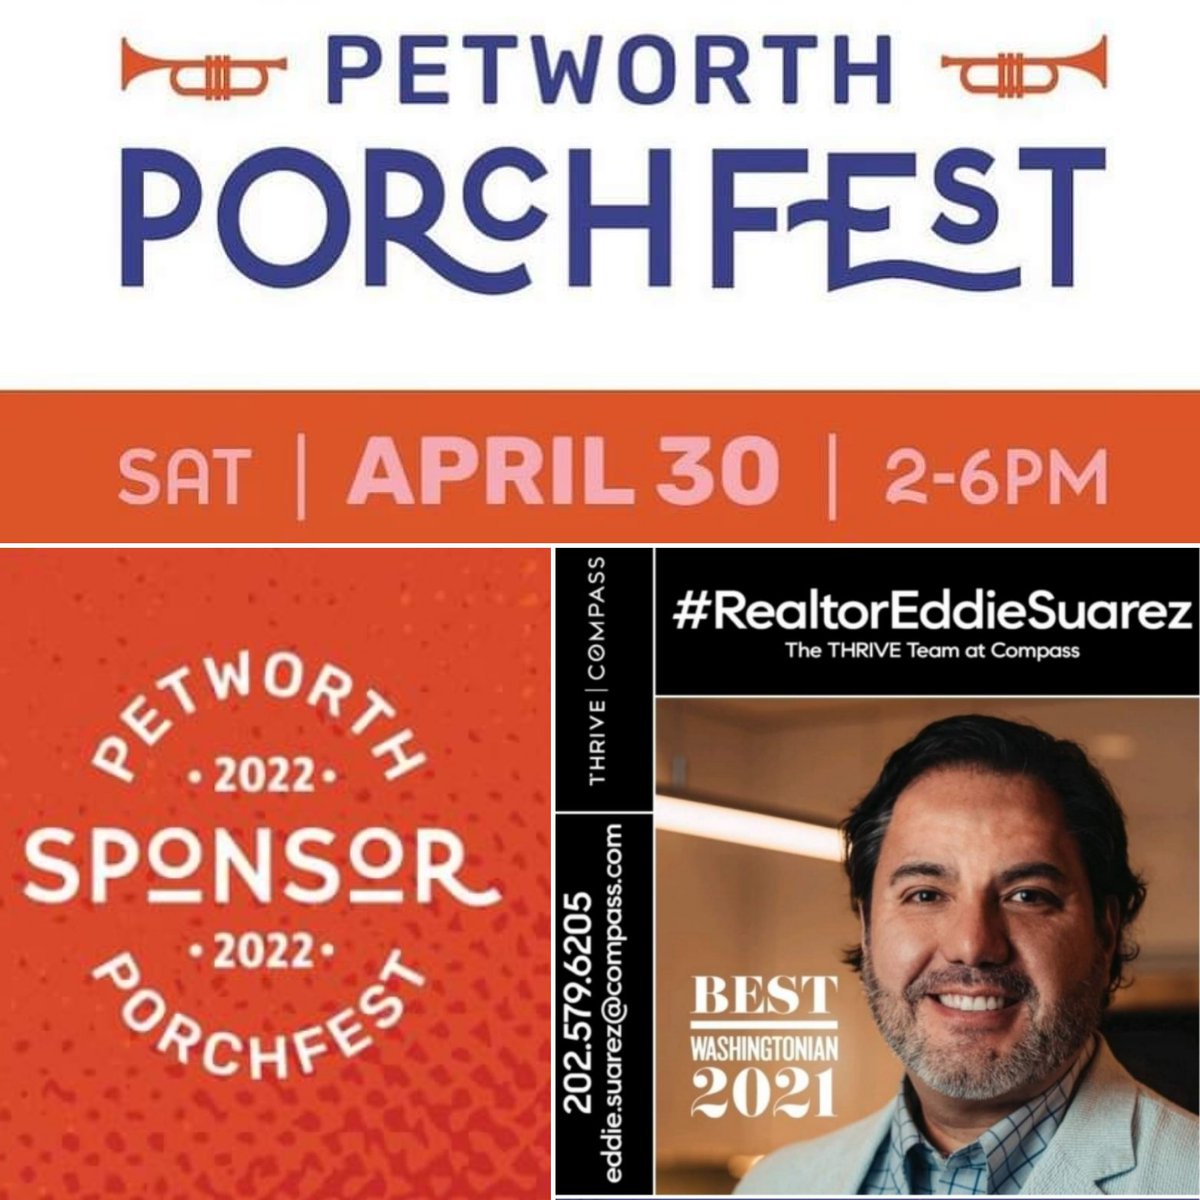 COUNTING THE HOURS DOWN TO THE START of #PetworthPorchFest on SAT 4/30 at 2PM!!!🎵🎸Map of host locations and a list of the talent here ➡️  @petworthporchfest .
THANKS to ALL the organizers, volunteers & collaborators! 
#RealtorEddieSuarez #PorchFestDC #PetworthDC